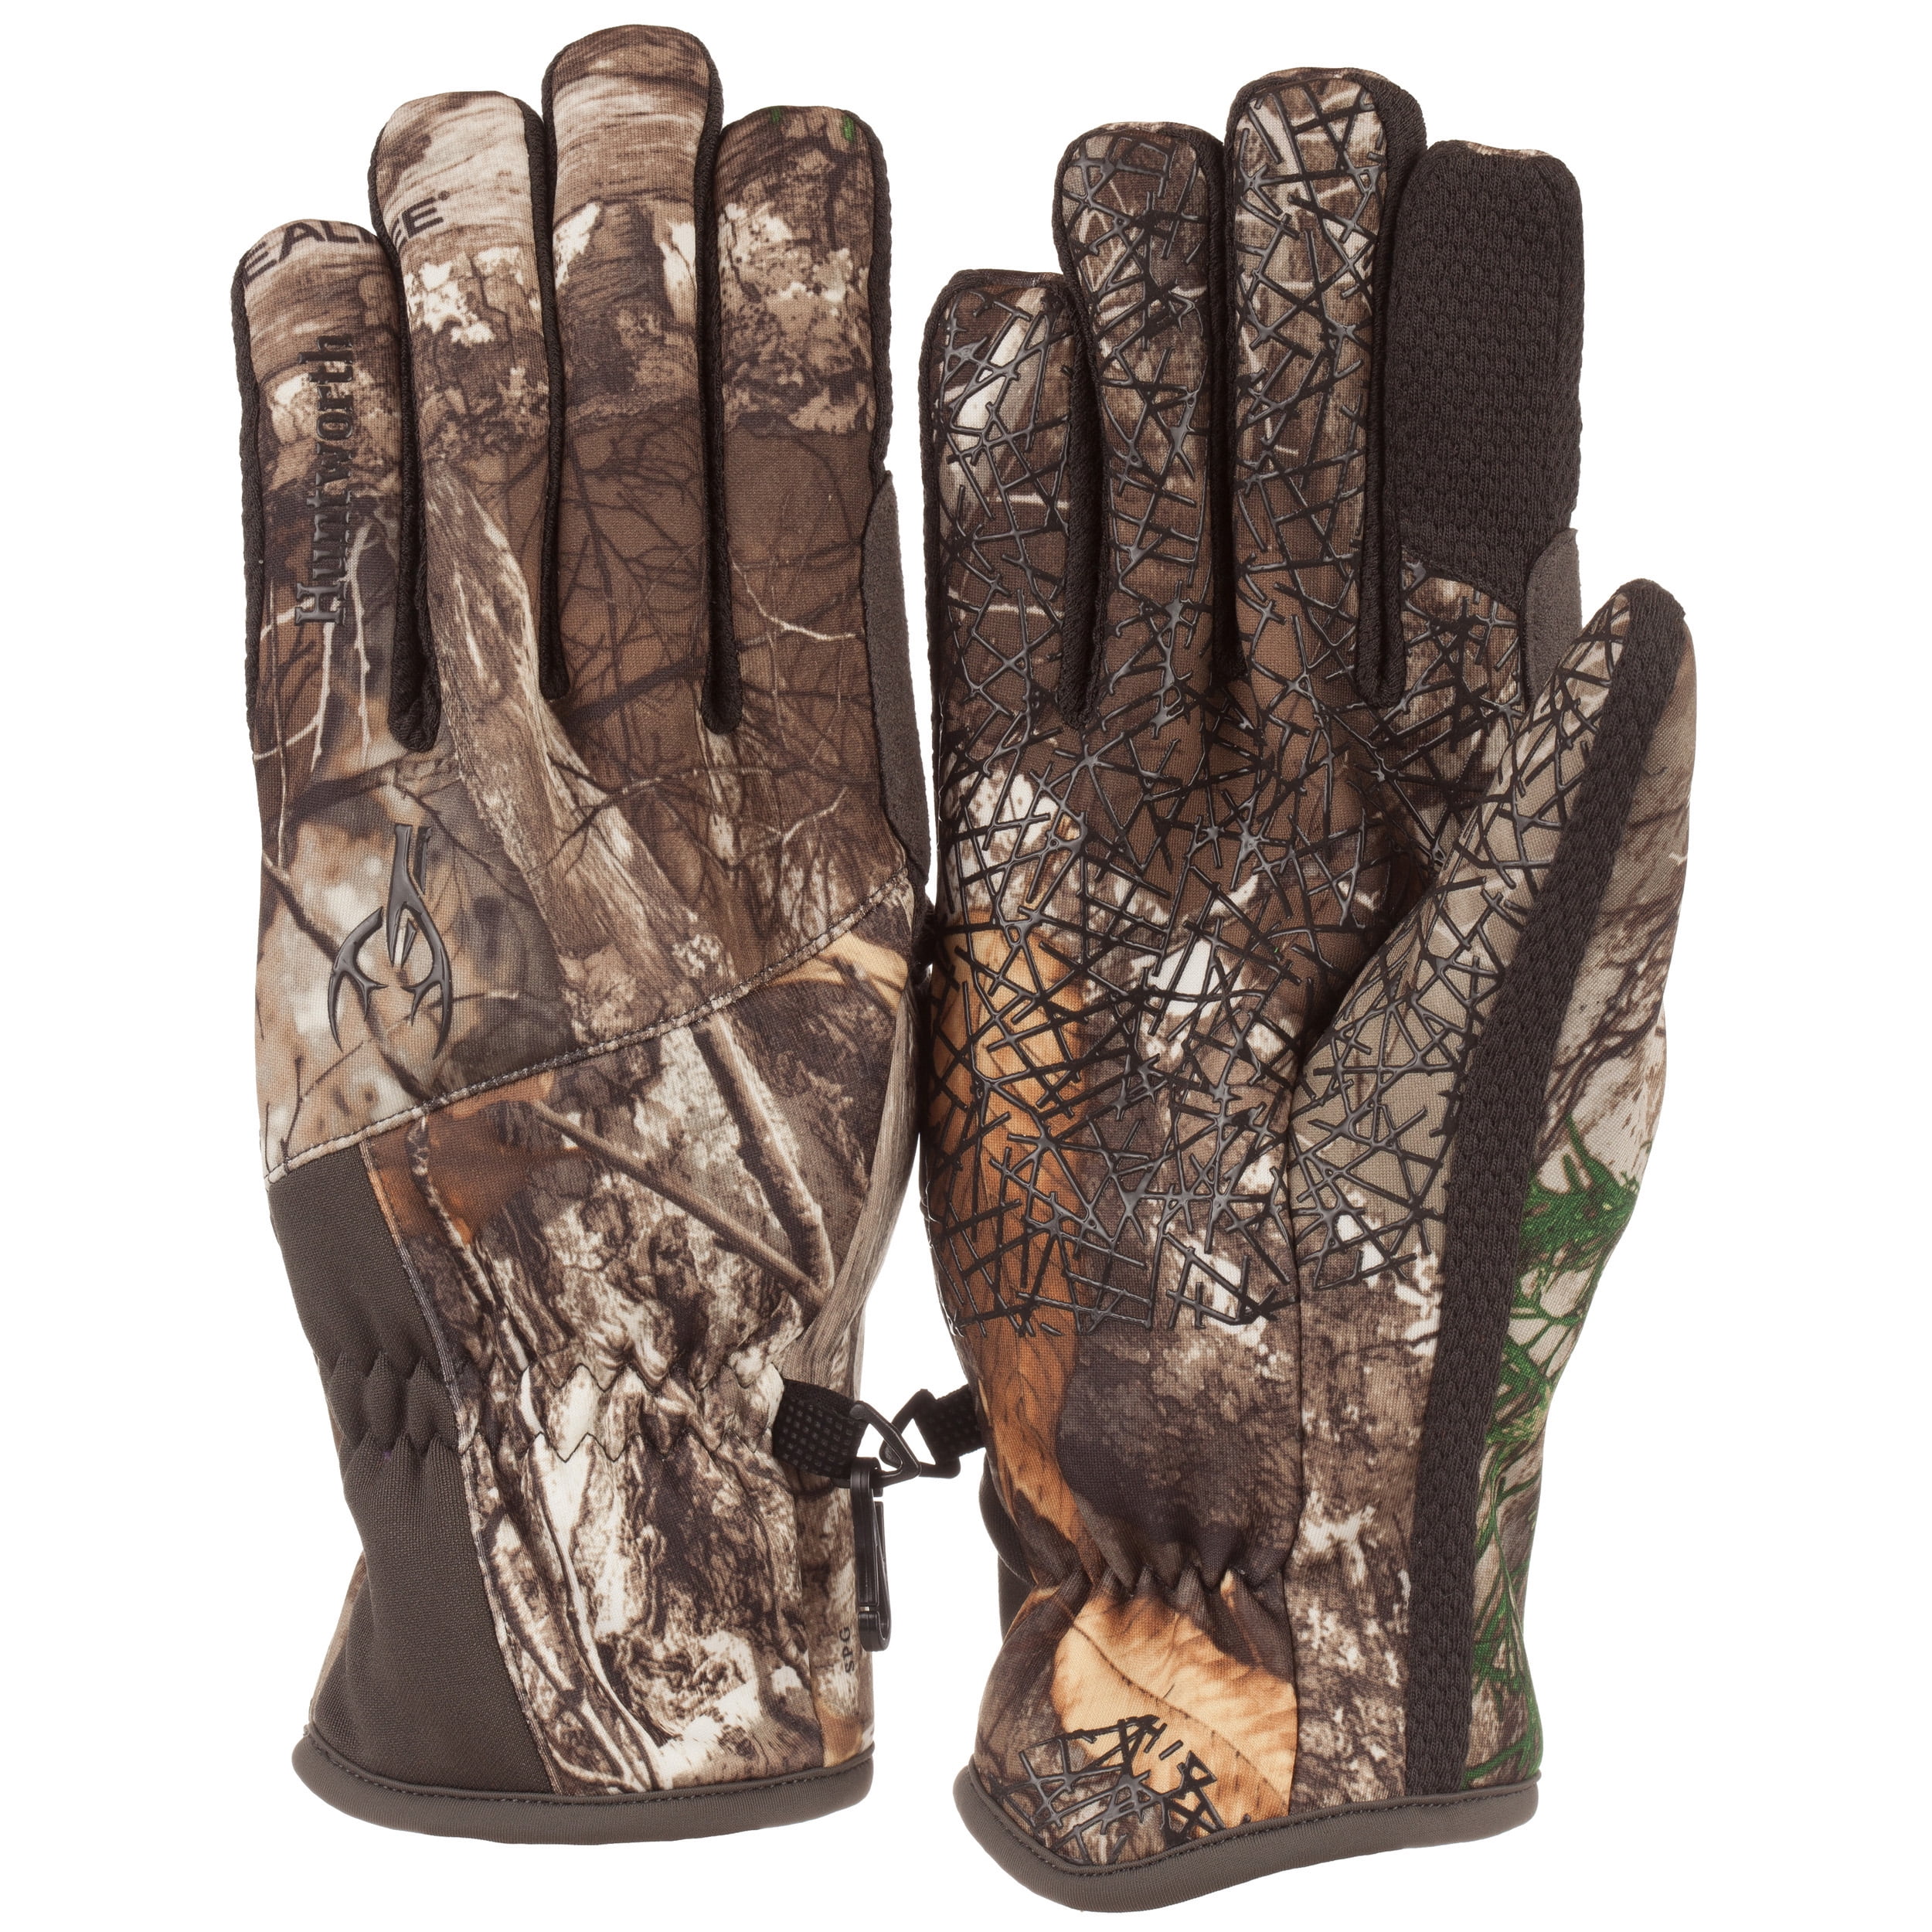 Huntworth Men's Gunner Midweight Hunting Gloves - RealTree Edge®, Size M/L  